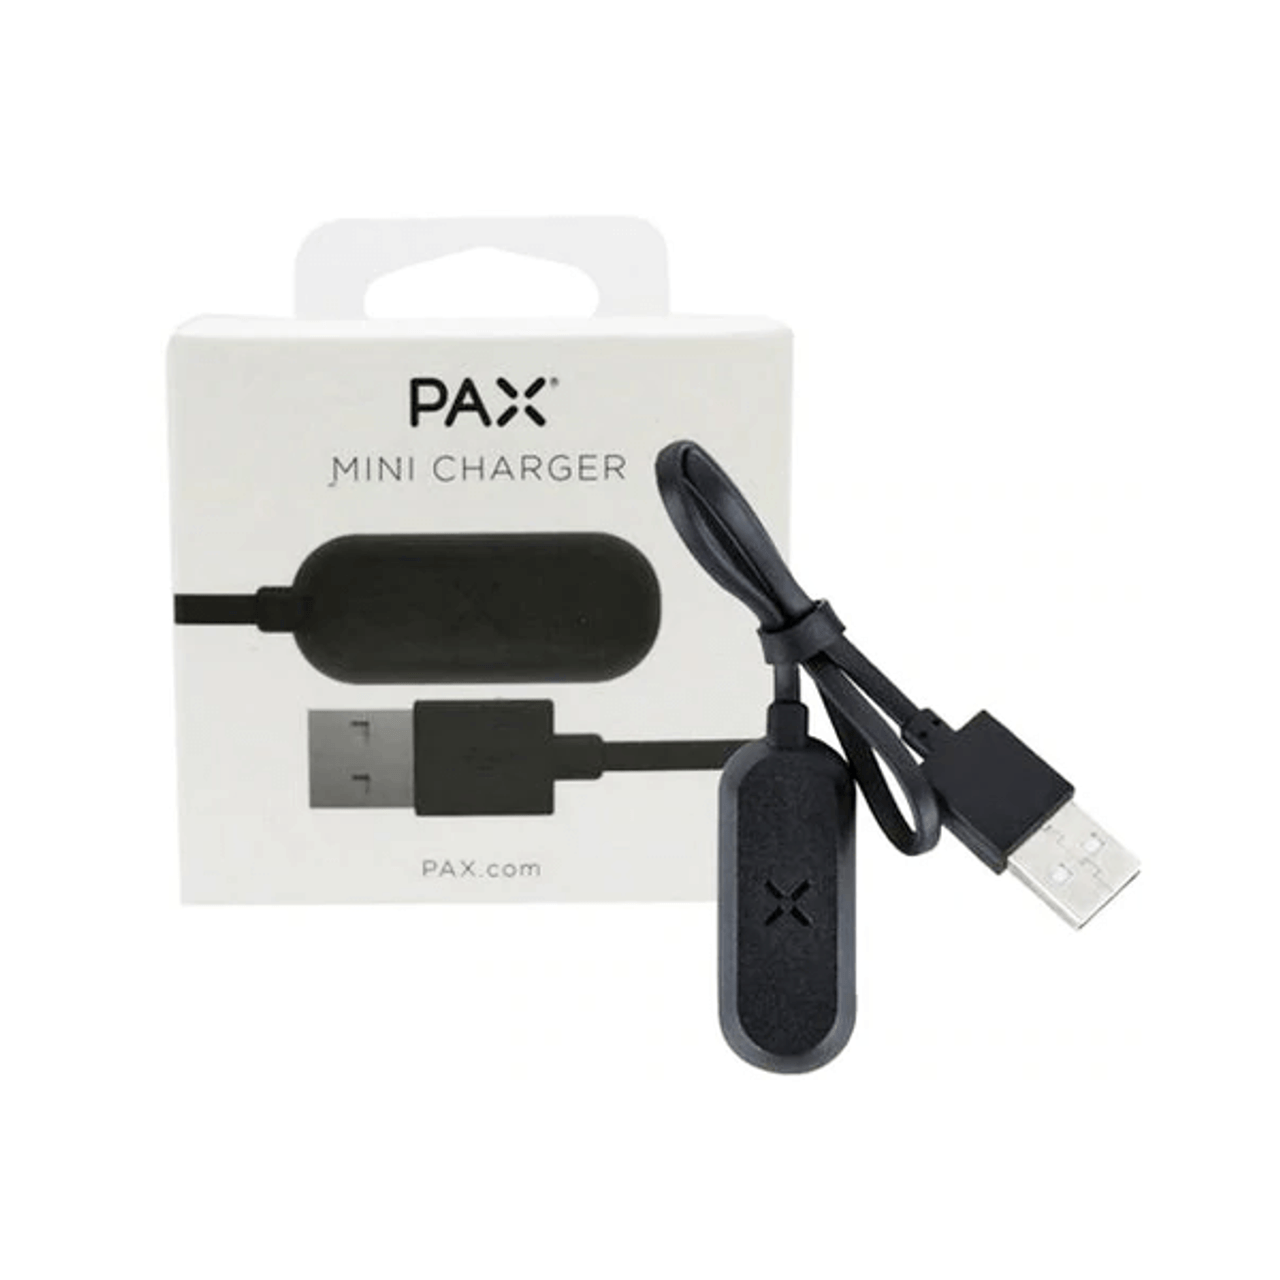 https://cdn11.bigcommerce.com/s-5zbebjcuob/images/stencil/1280x1280/products/5505/12600/PAX-Mini-Charger-1__83951.1695420412.png?c=2